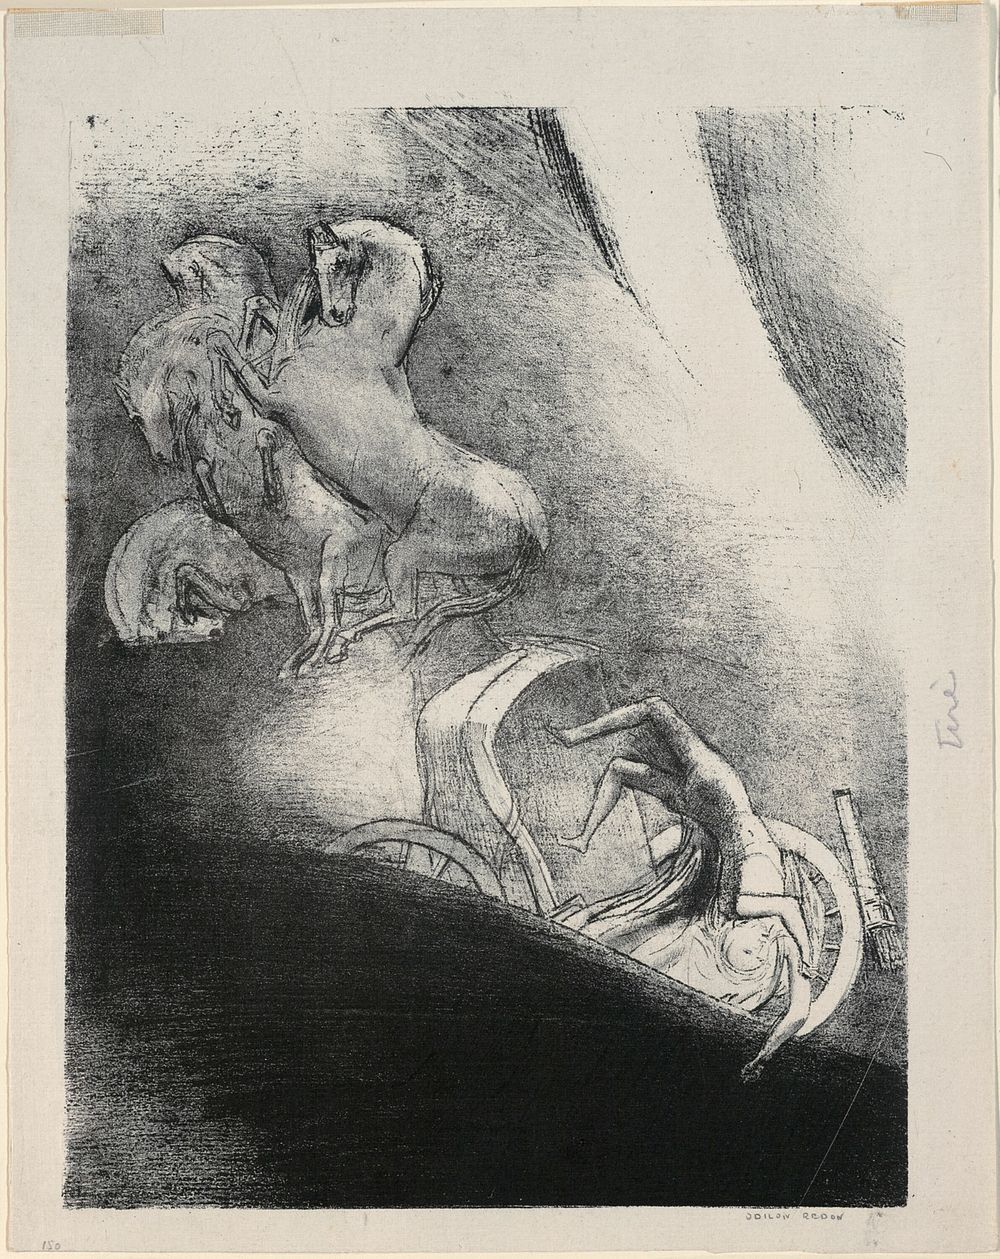 He Falls Head Foremost Into the Abyss, plate 17 of 24 by Odilon Redon